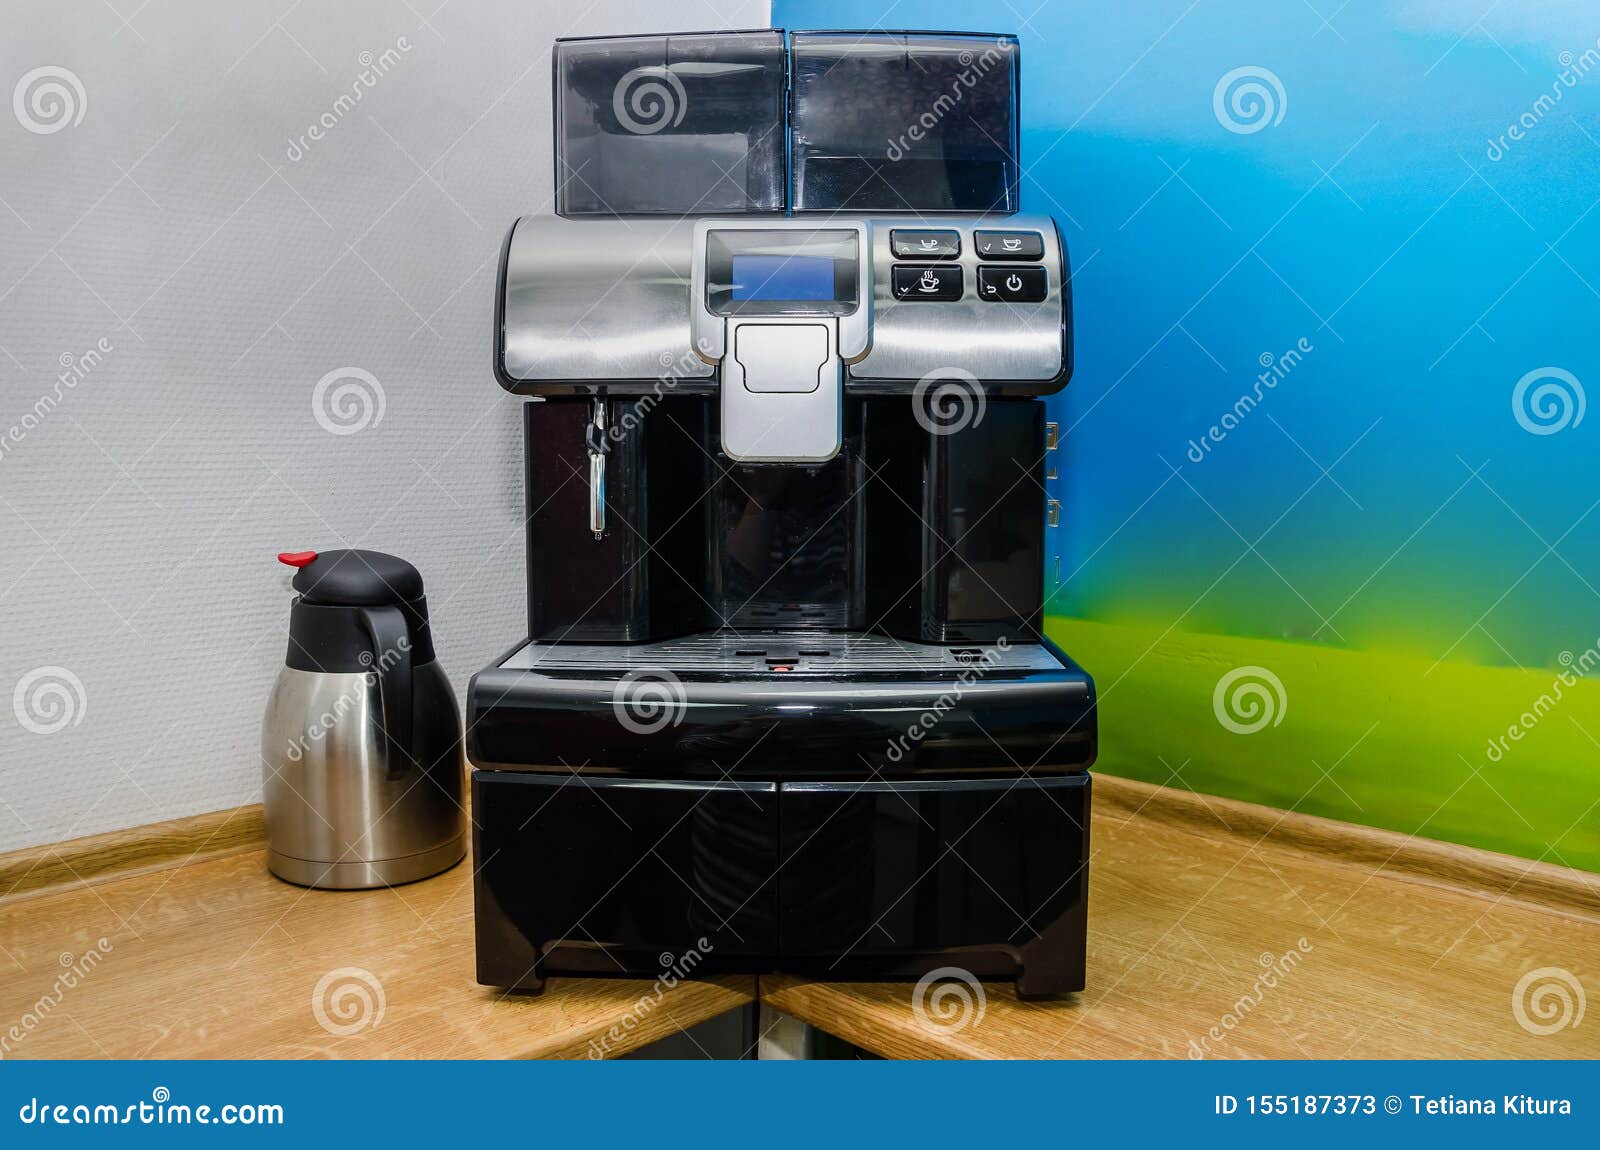 https://thumbs.dreamstime.com/z/coffee-machine-electric-kettle-office-desk-front-view-155187373.jpg